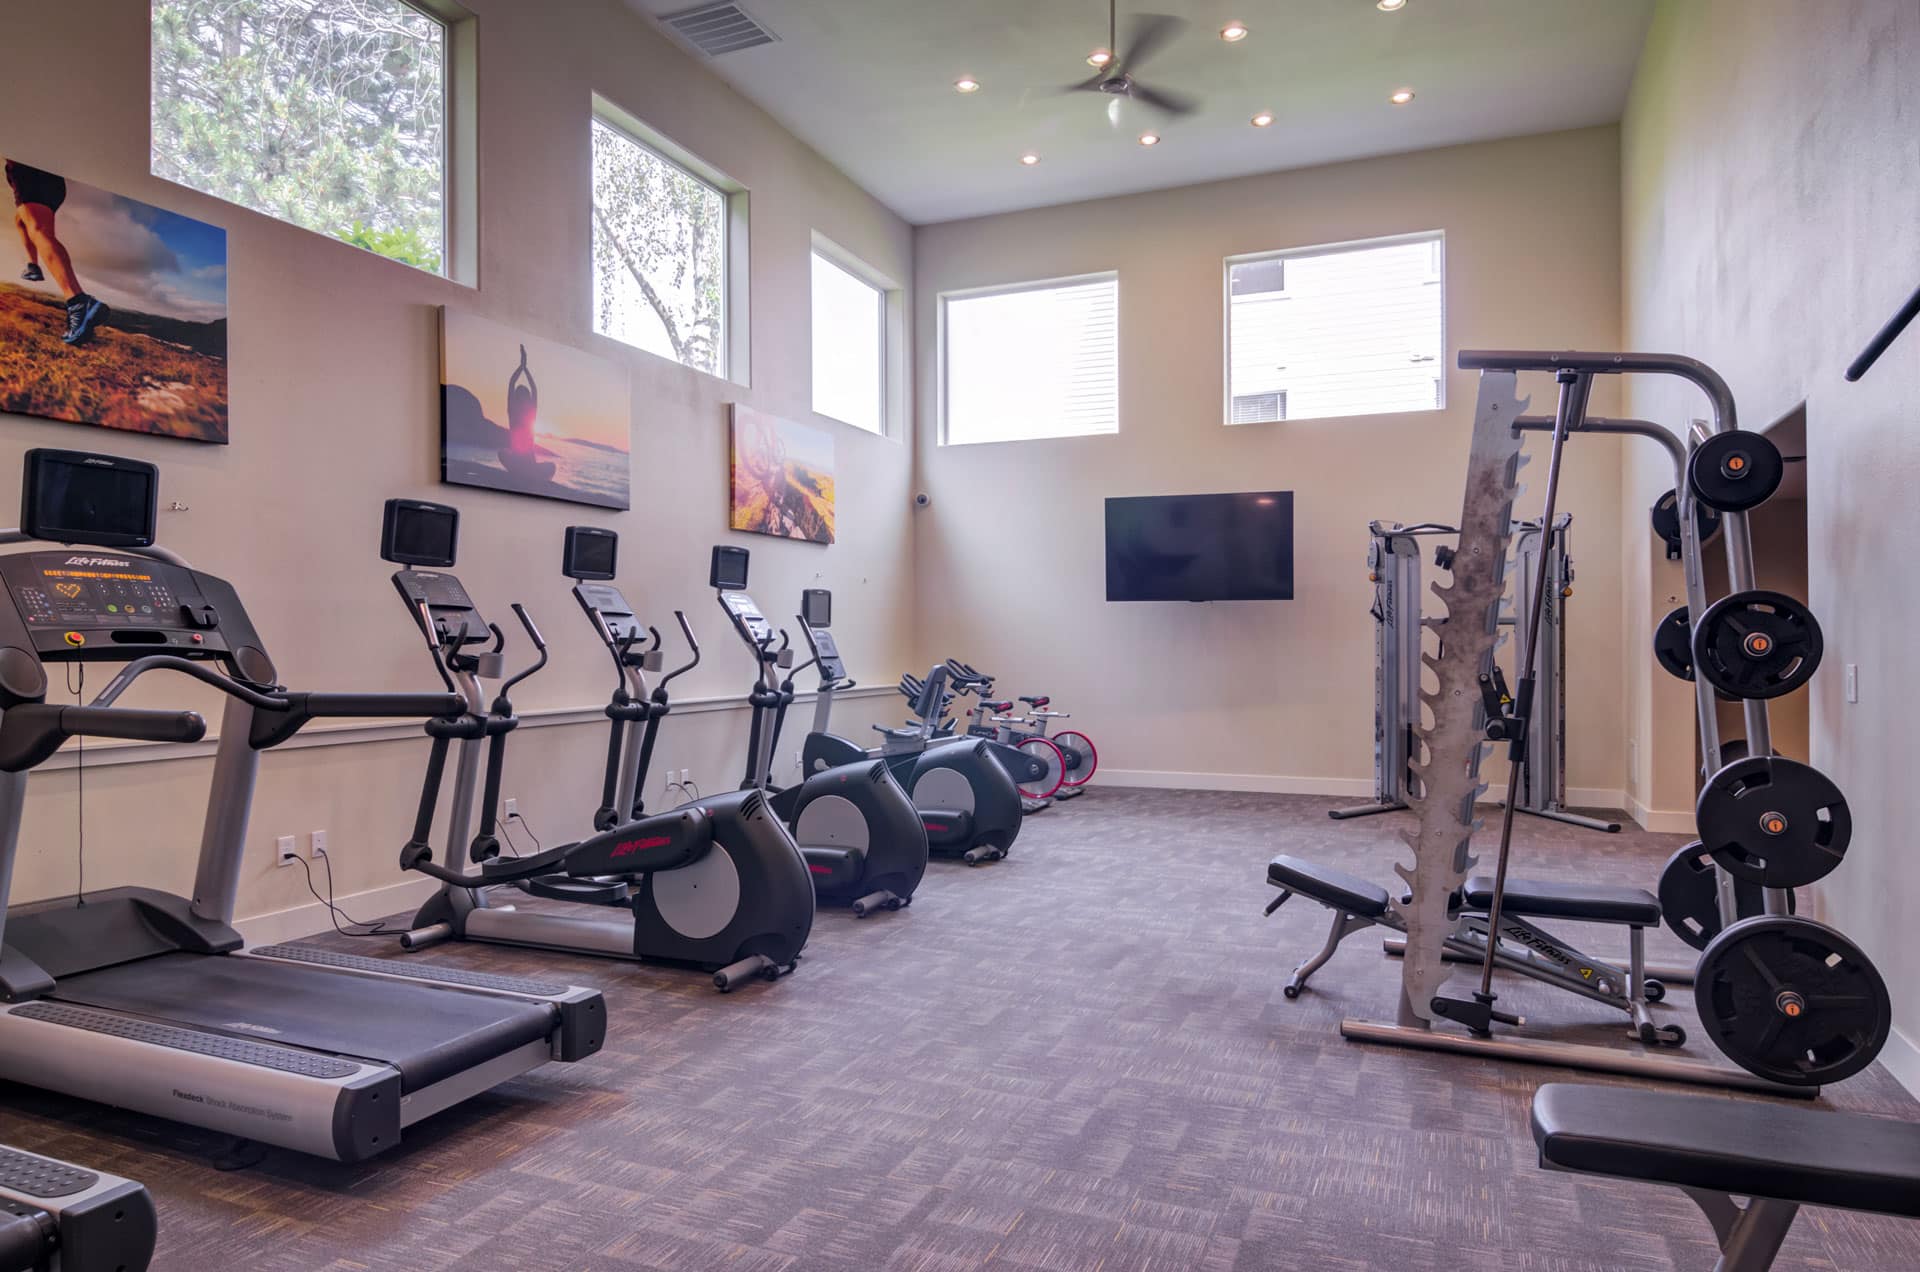 Fitness center with free weights and cardio machines.